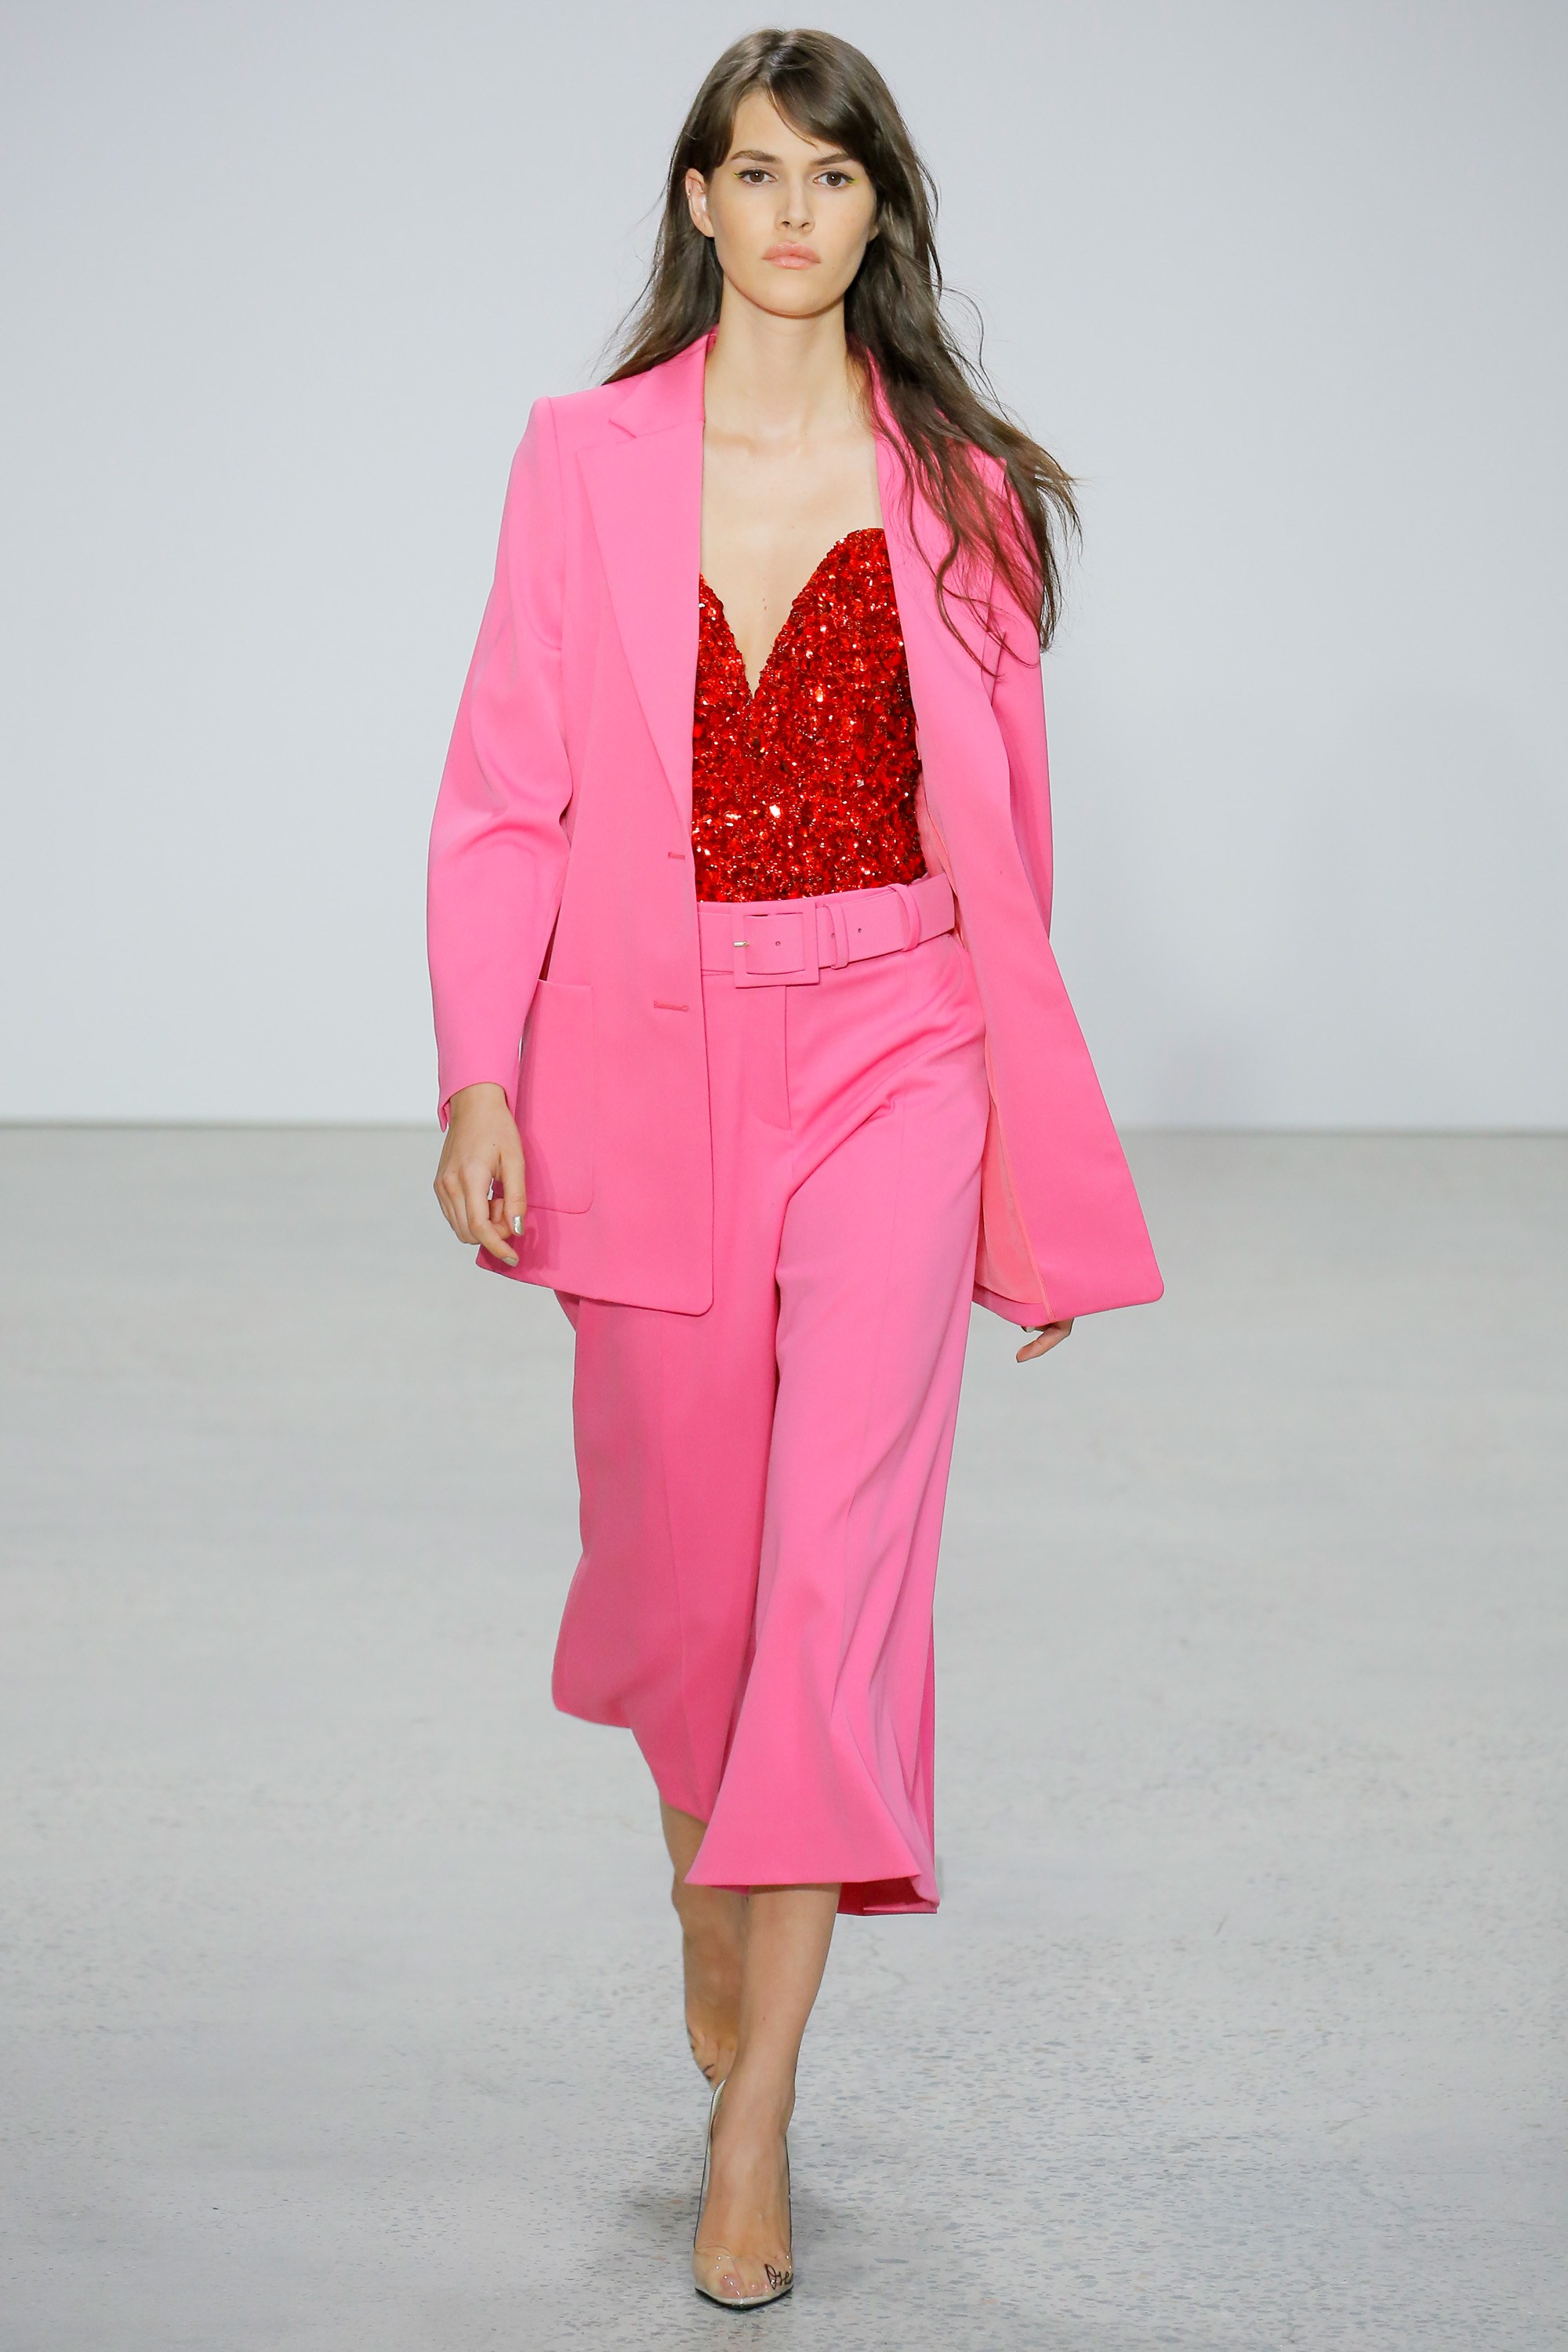 For the ss18 be in fuchsia mood - ZOE Magazine